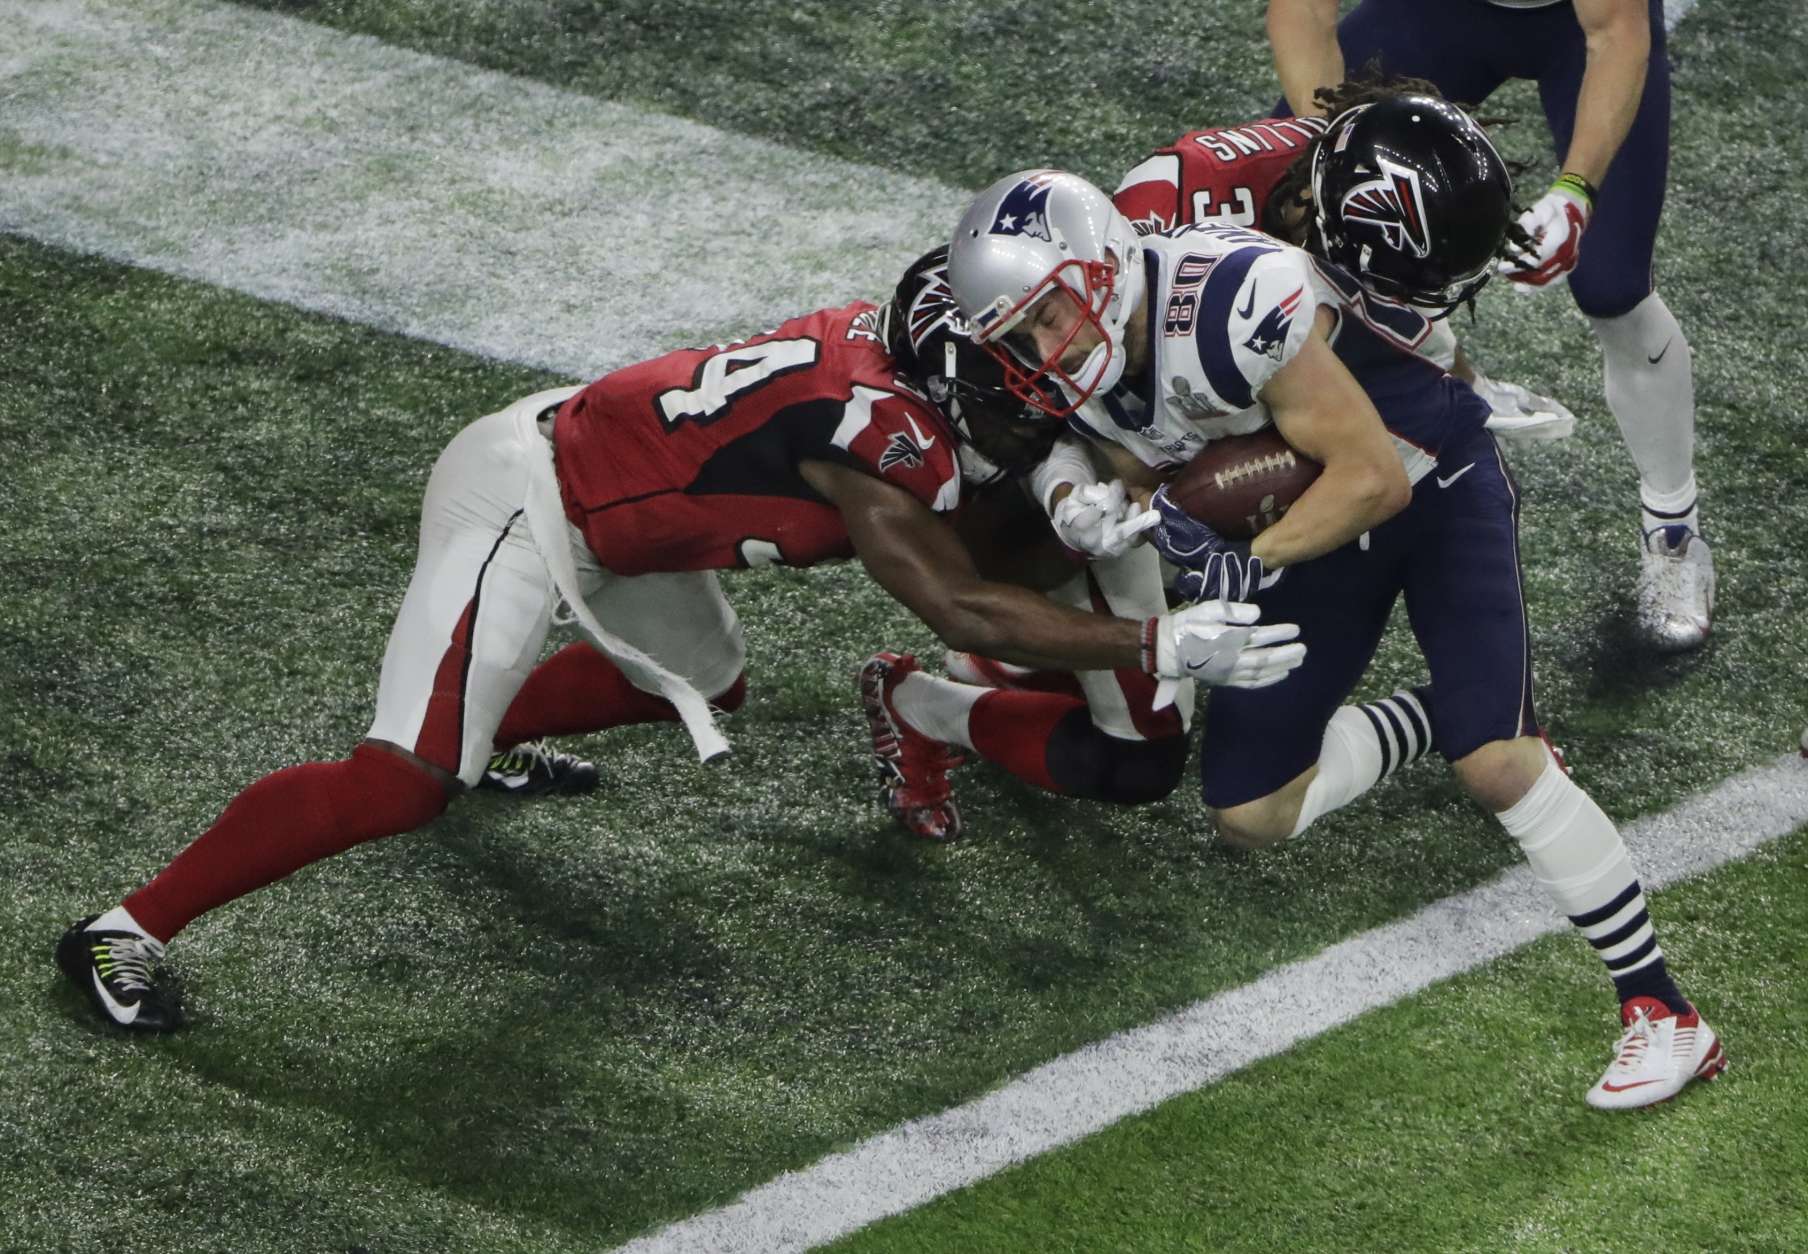 New England Patriots' Danny Amendola scores on a two point conversion during the second half of the NFL Super Bowl 51 football game against the Atlanta Falcons, Sunday, Feb. 5, 2017, in Houston. (AP Photo/Charlie Riedel)